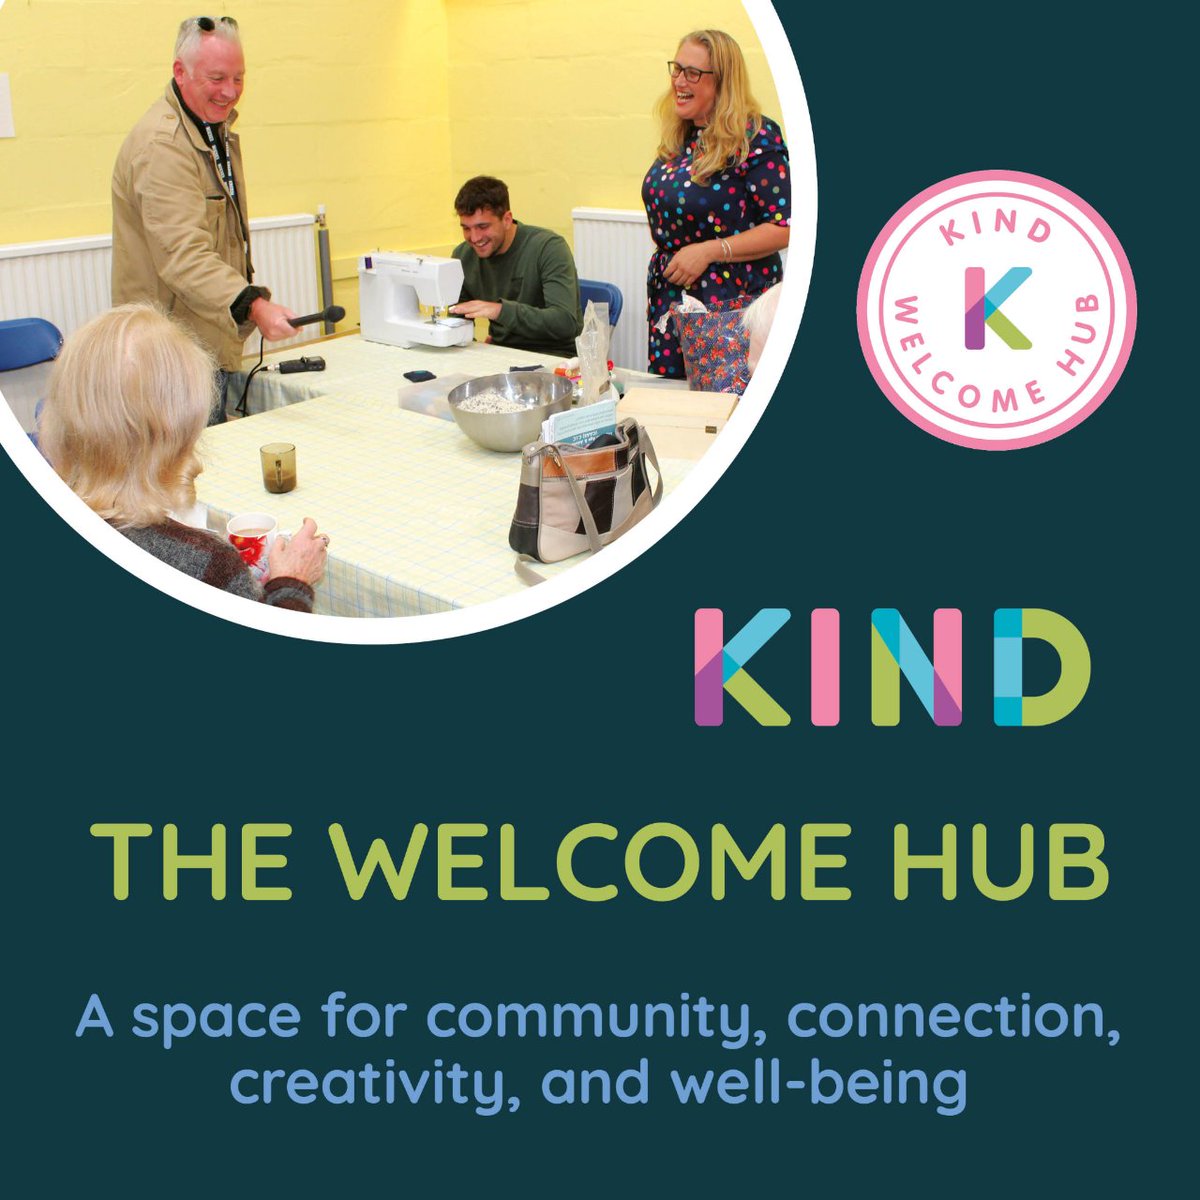 🎉Just a friendly reminder! 🎉 The Welcome Hub is back tomorrow at the United Reform Church at 10am. Join us for a natter and get crafty as we kick off Mental Health Awareness where @MindCharity  will be joining us to decorate Hope Stones. 🌟 #WelcomeHub #MentalHealthAwareness